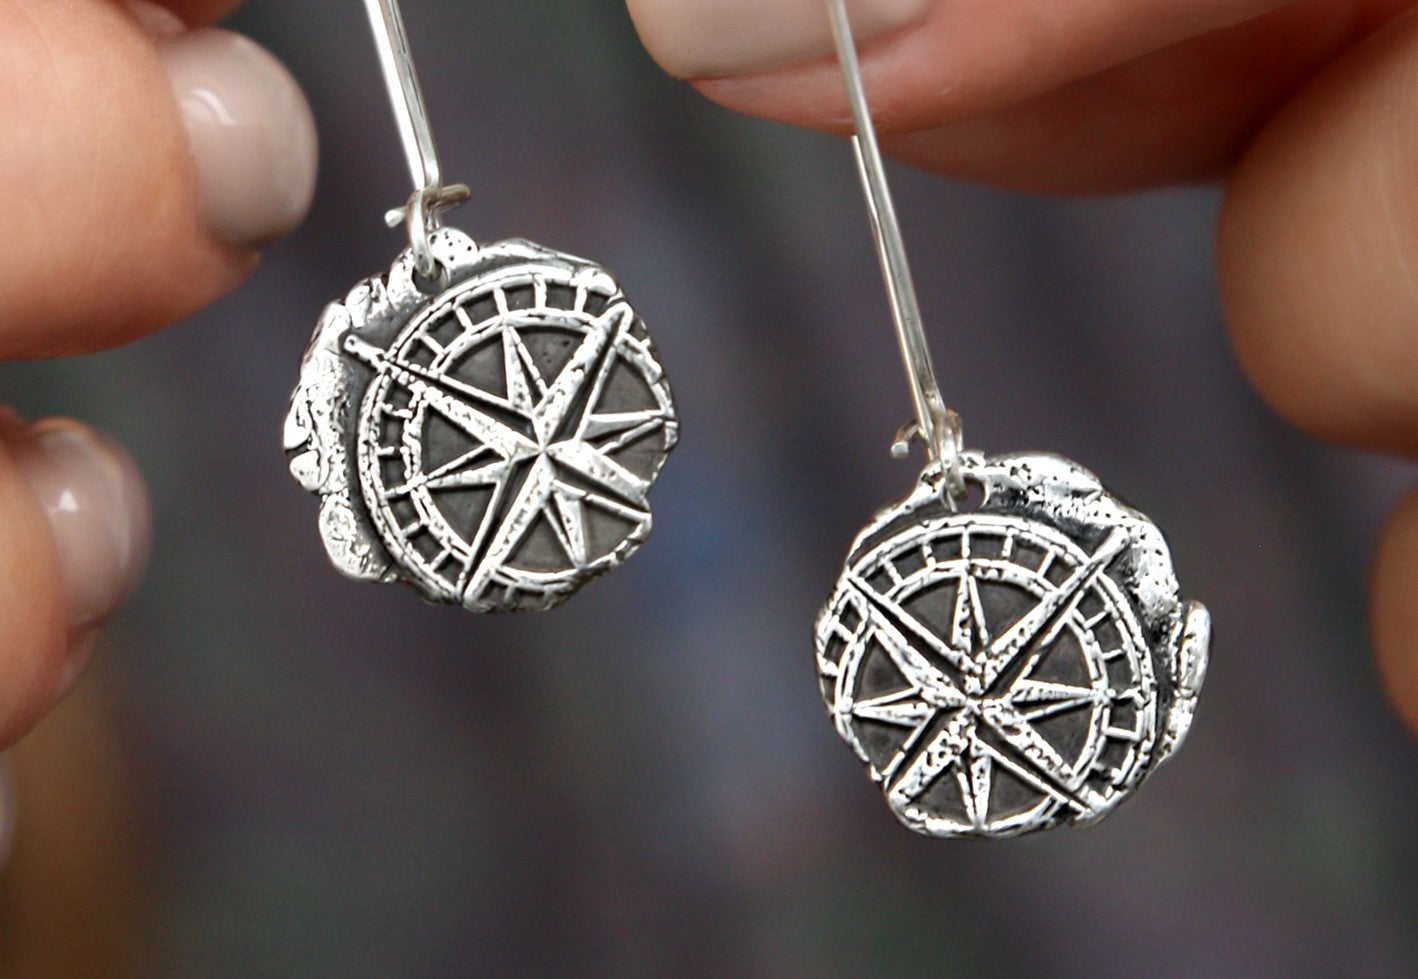 Sterling Silver Compass Earrings